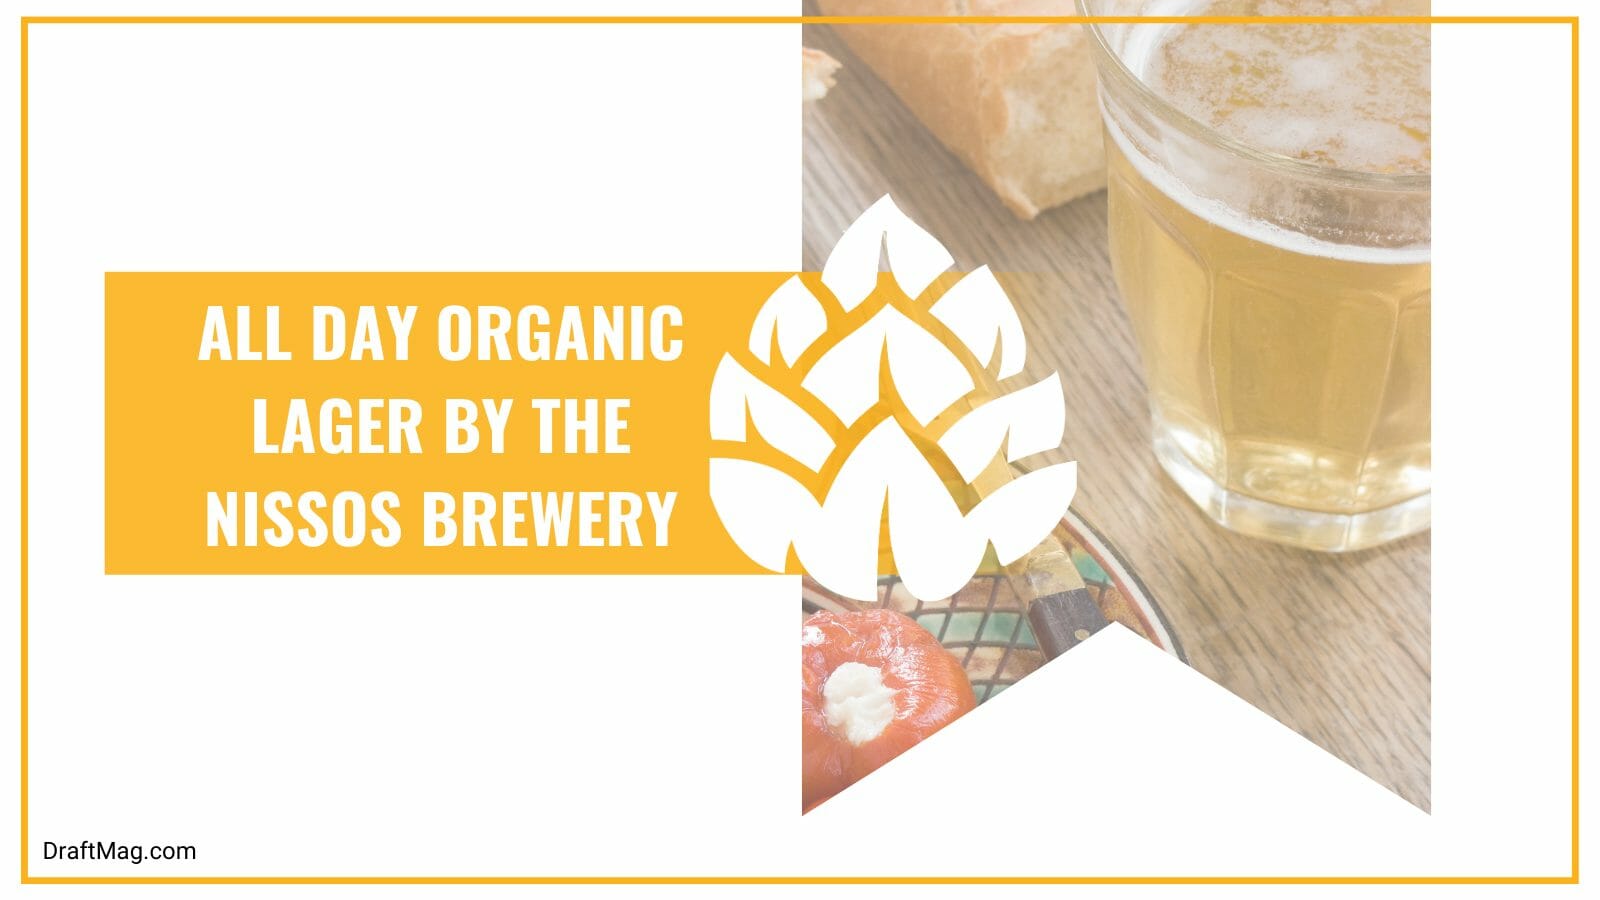 All day organic lager